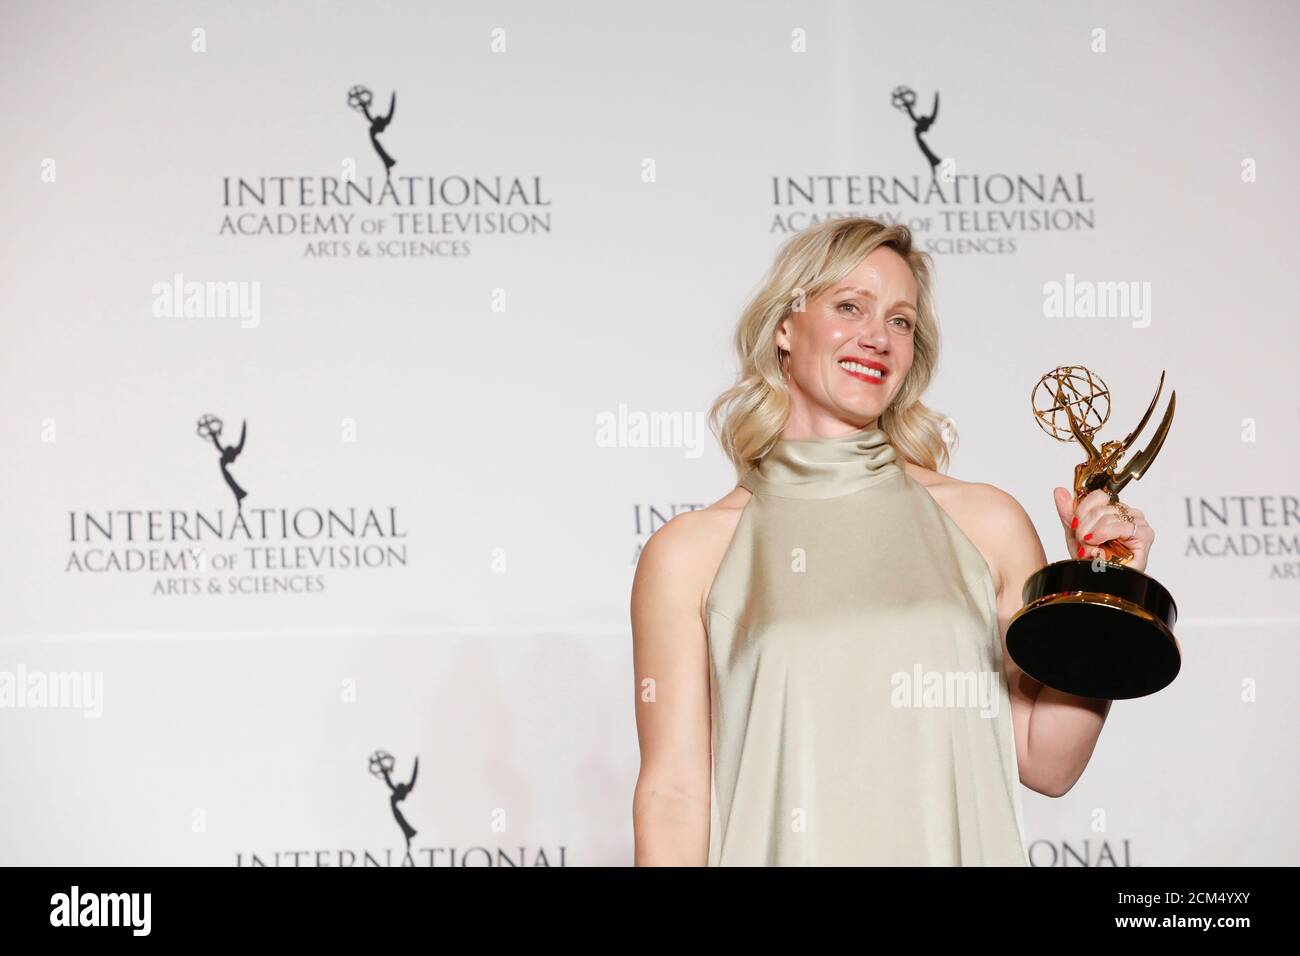 Actress Anna Schudt poses with her award for Best Performance by an Actress for her role in Ein Schnupfen Hatte Auch Gereicht (The Sniffles Would Have Been Just Fine) at the International Emmy Awards in Manhattan, New York City, U.S., November 19, 2018. REUTERS/Andrew Kelly Stock Photo